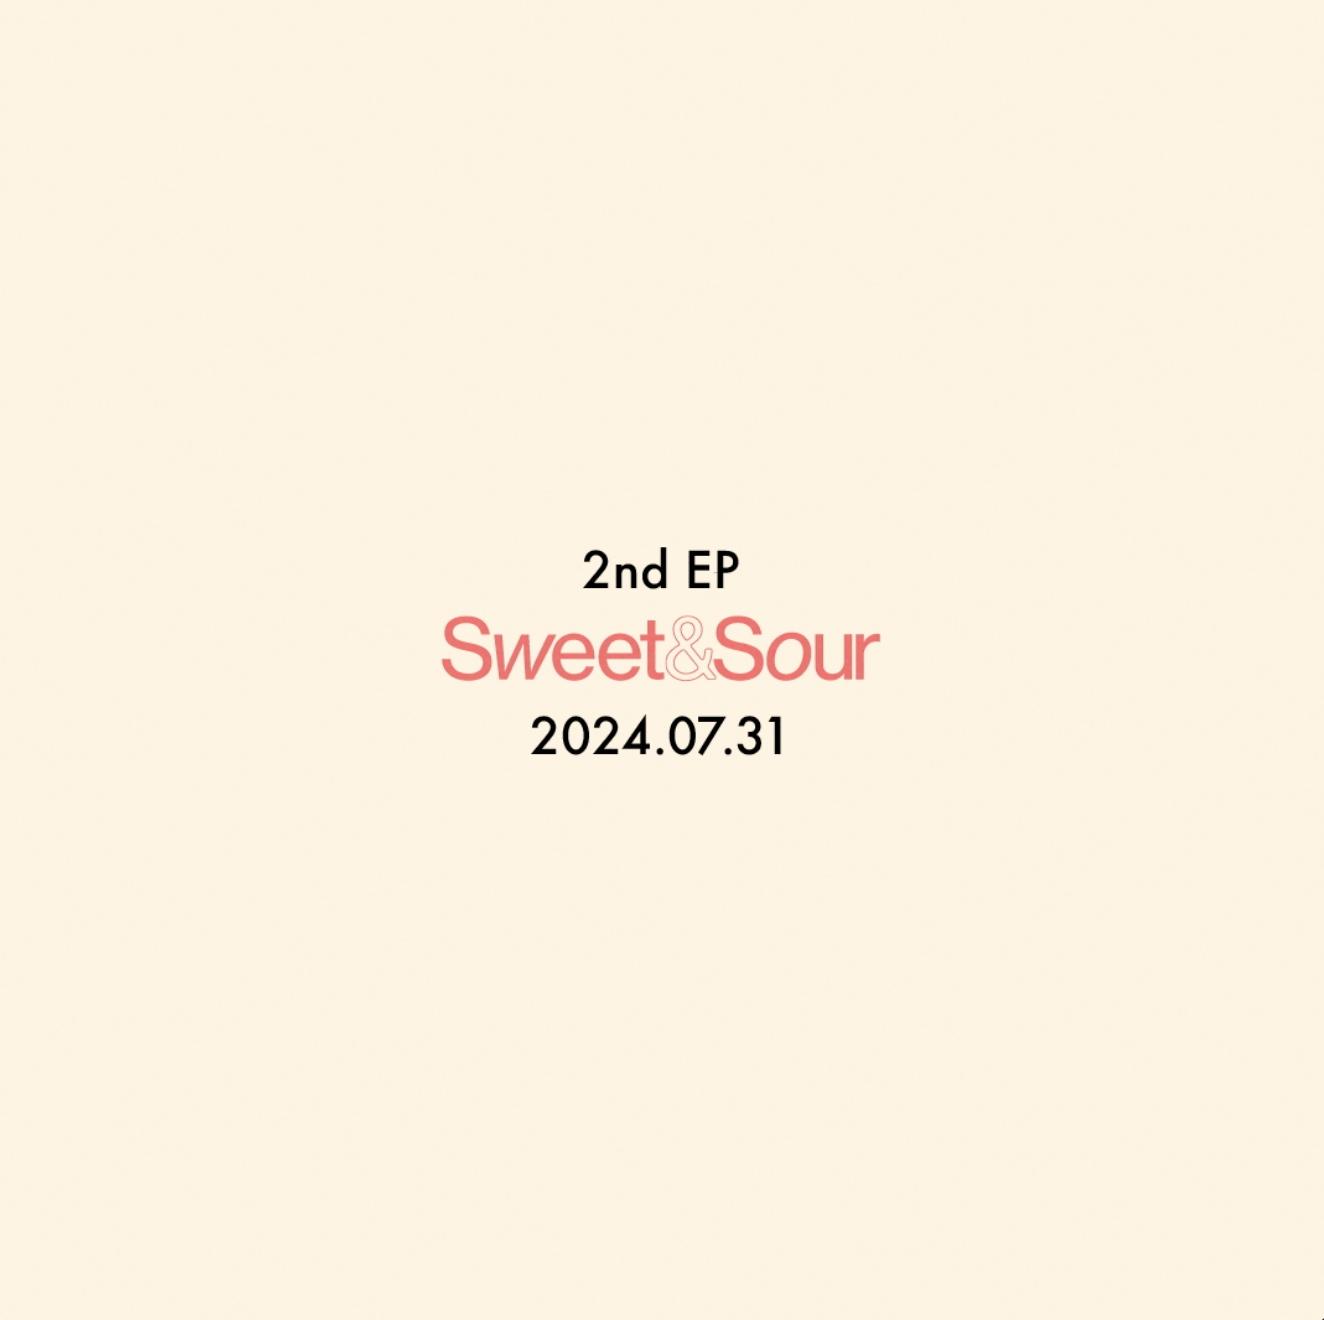 2nd EP「Sweet & Sour」7月31日リリース決定!!